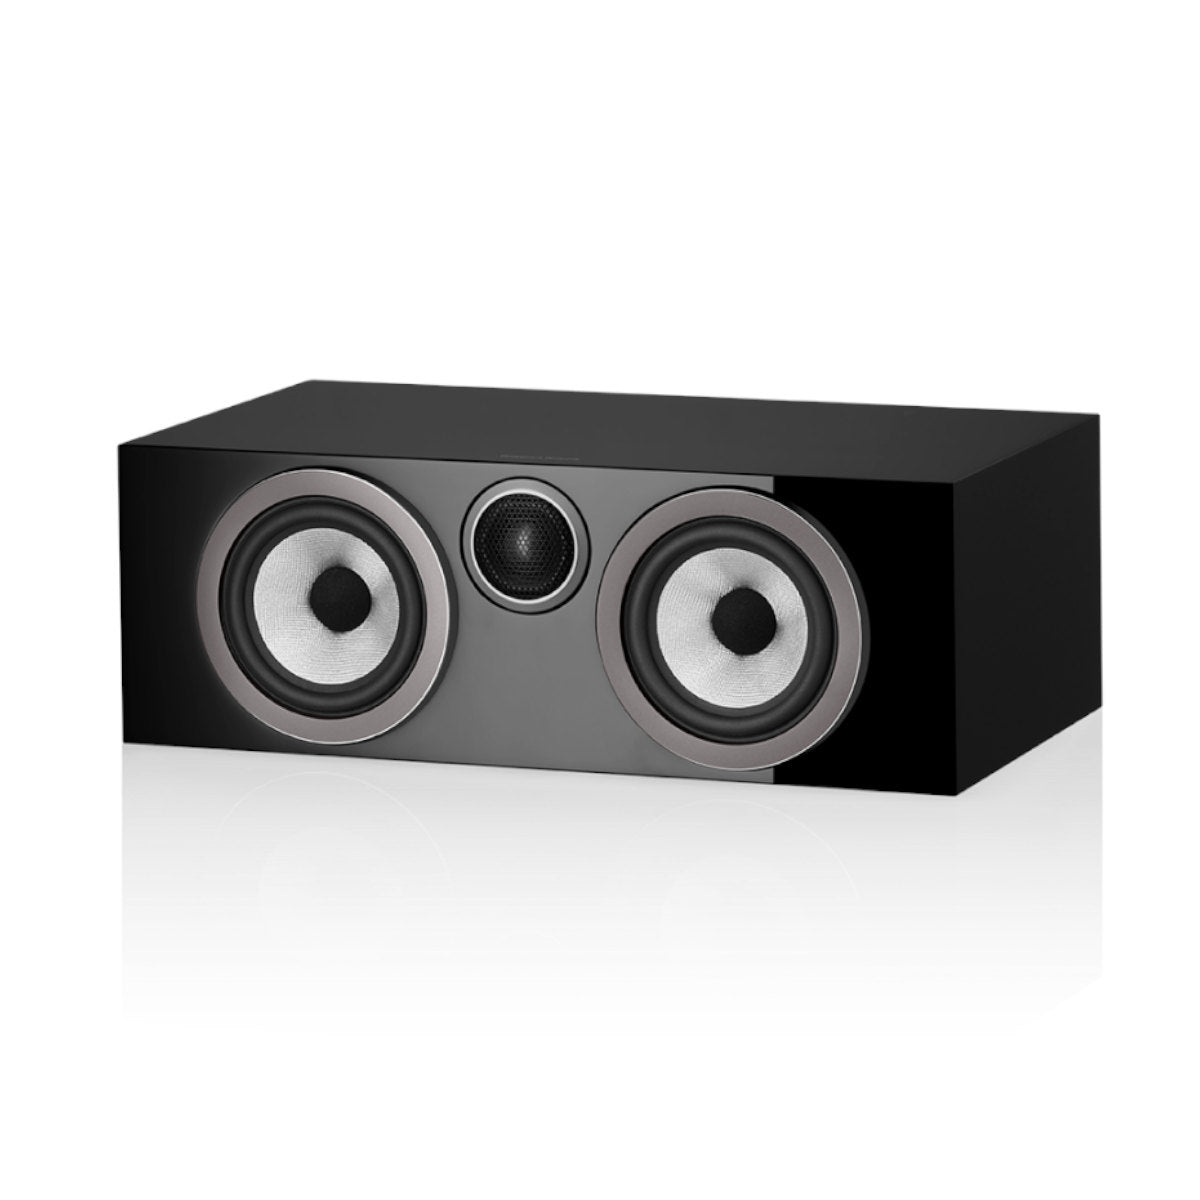 Bowers & Wilkins (B&W) HTM72 S3 Center Channel Speaker (Gloss Black) - Ooberpad India